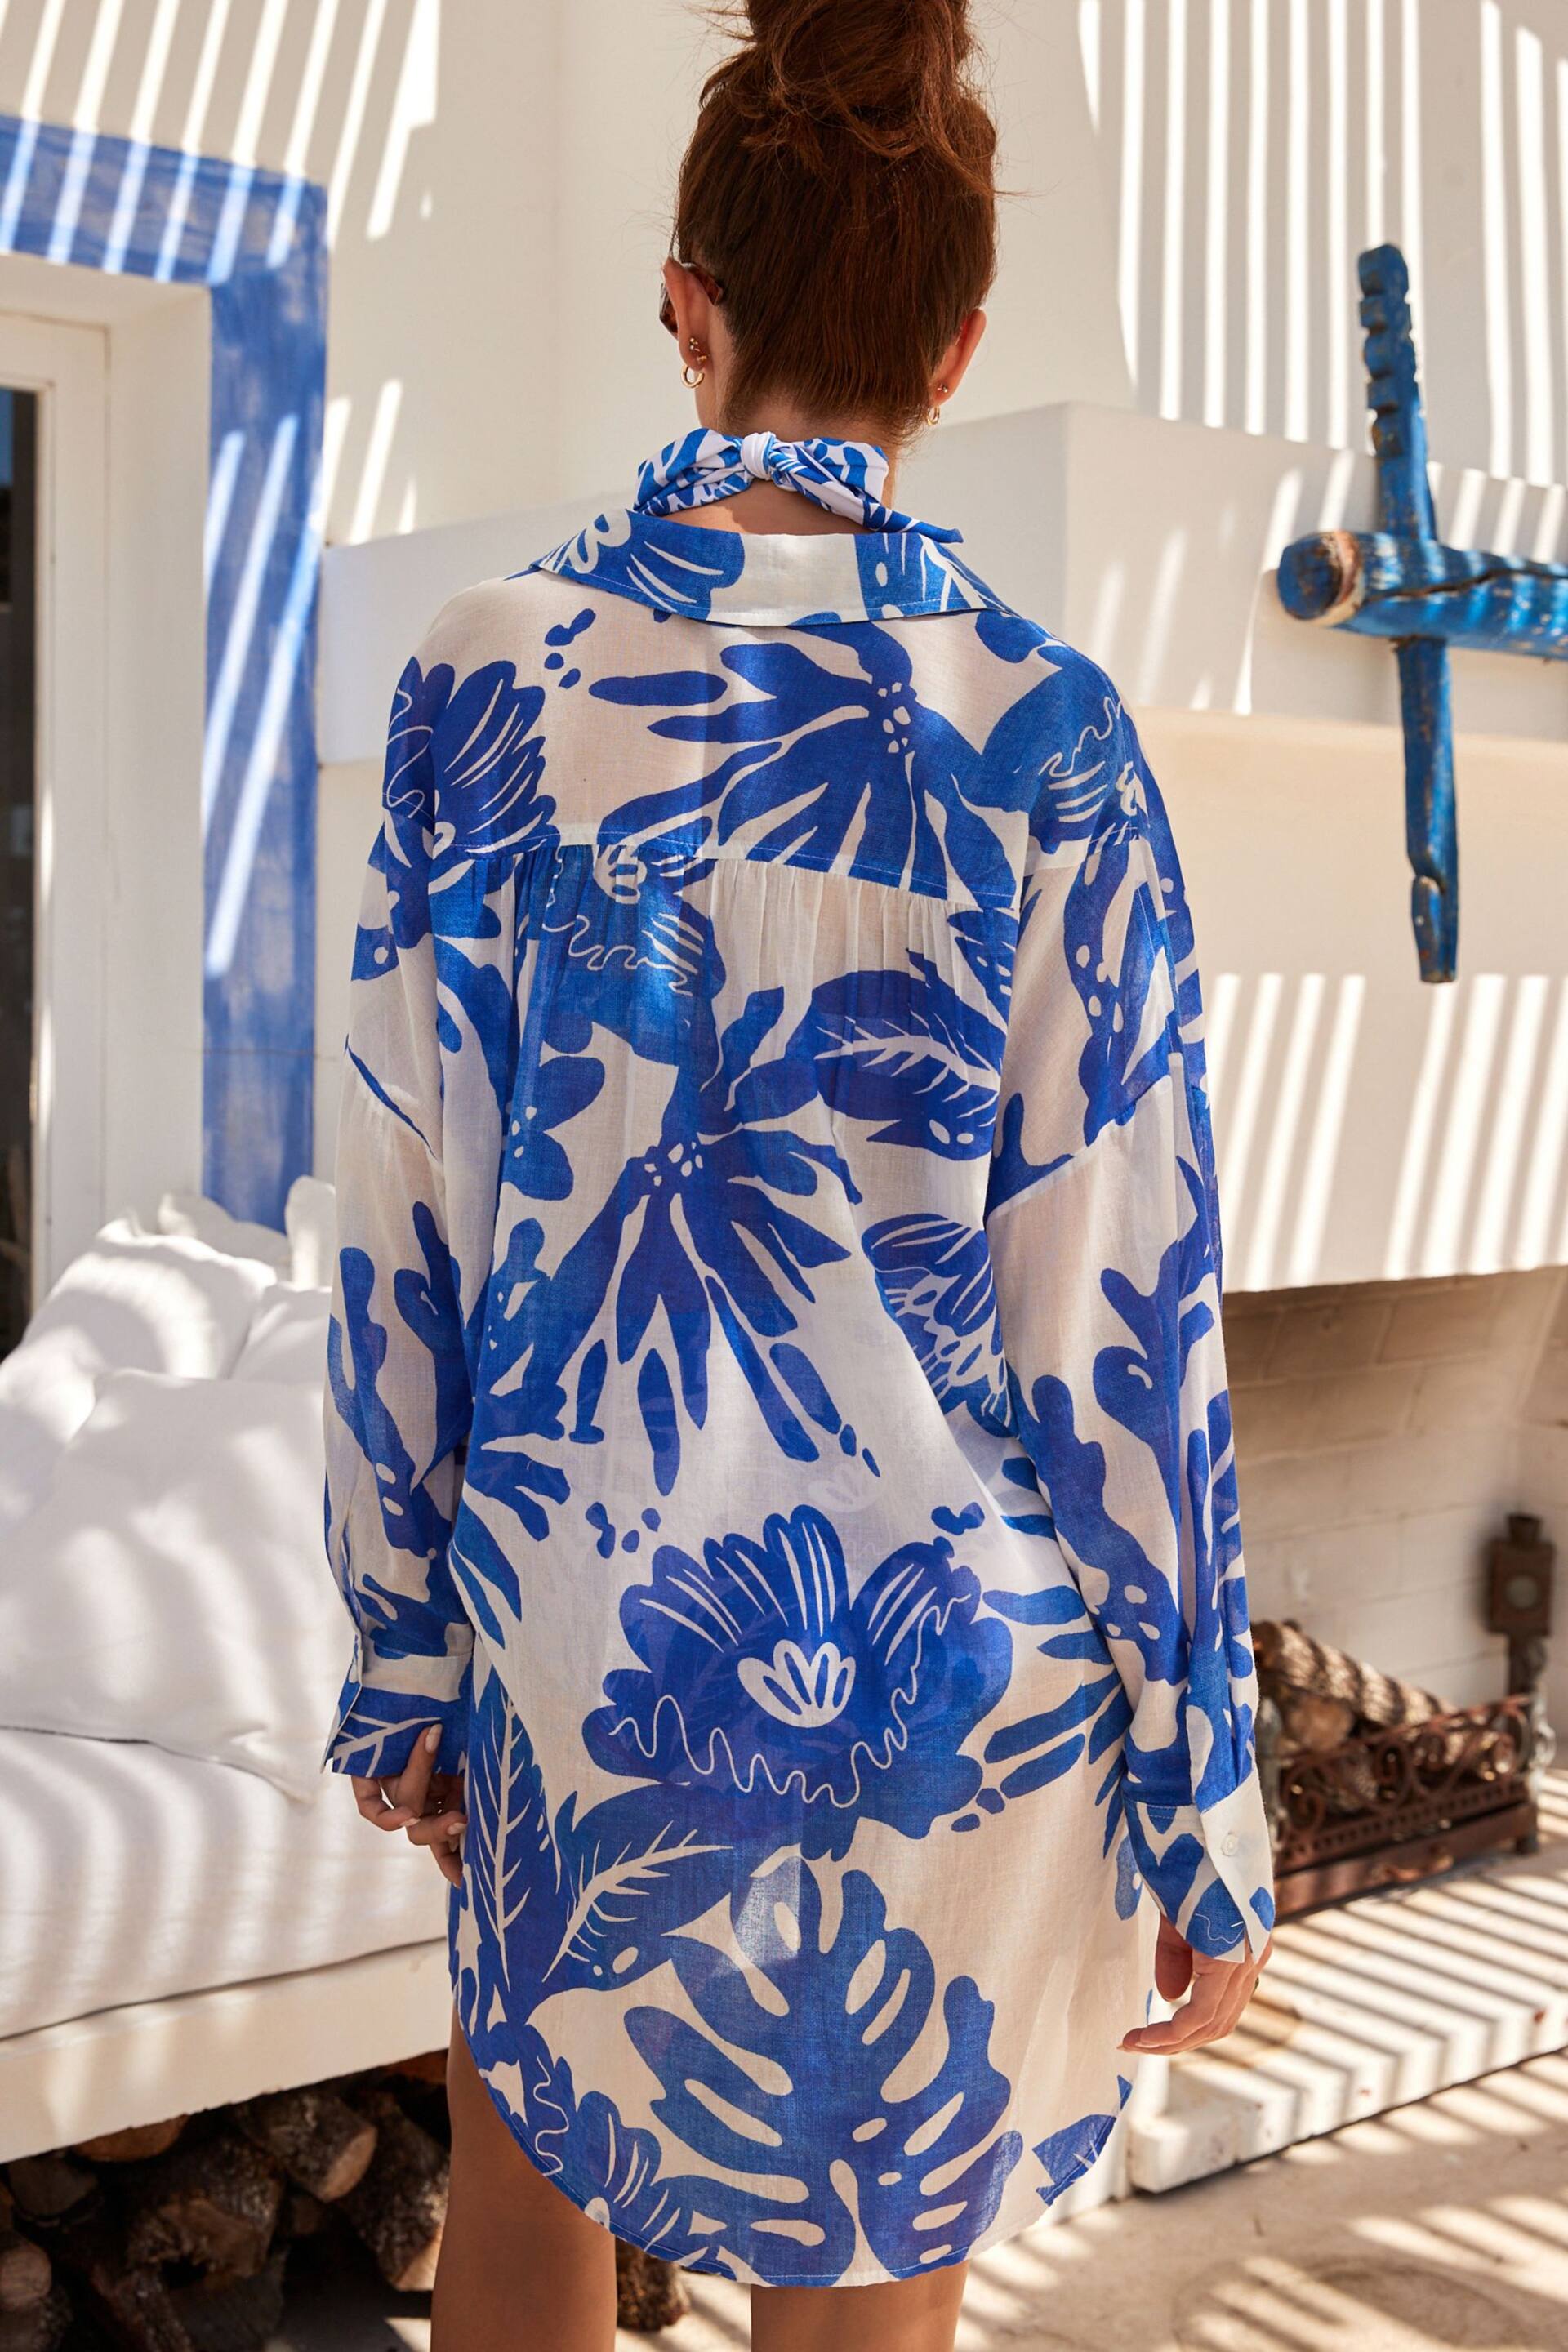 Blue Leaf Beach Shirt Cover-Up - Image 5 of 9